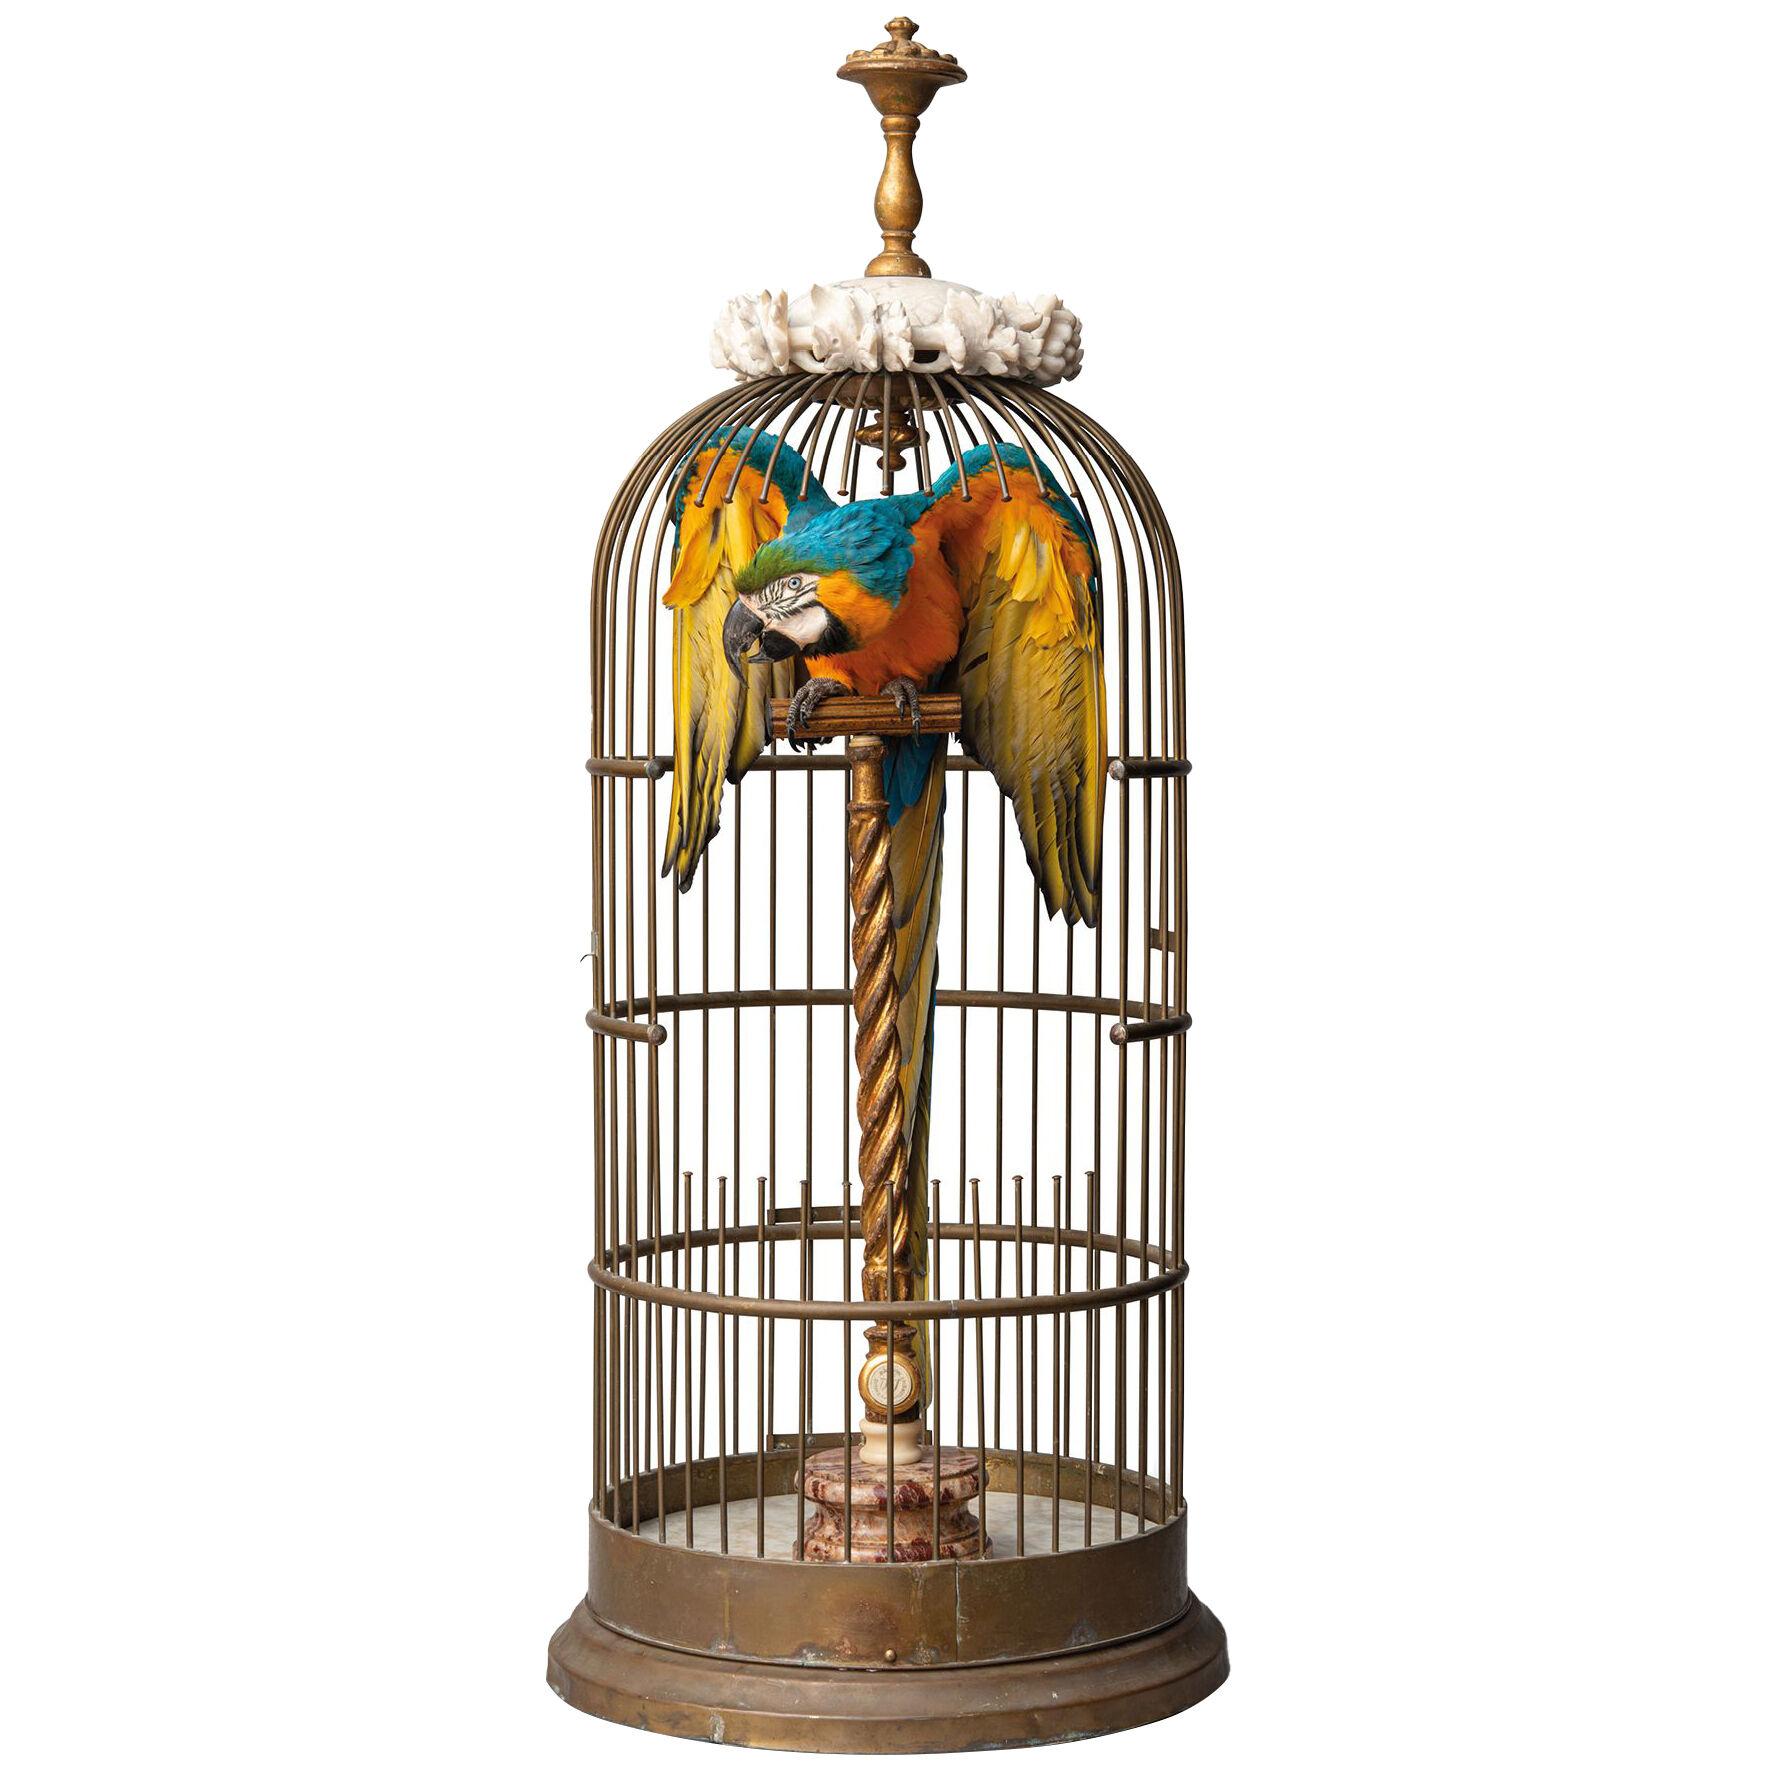 Fine Taxidermy Blue and Gold Macaw in Birdcage by Sinke & Van Tongeren